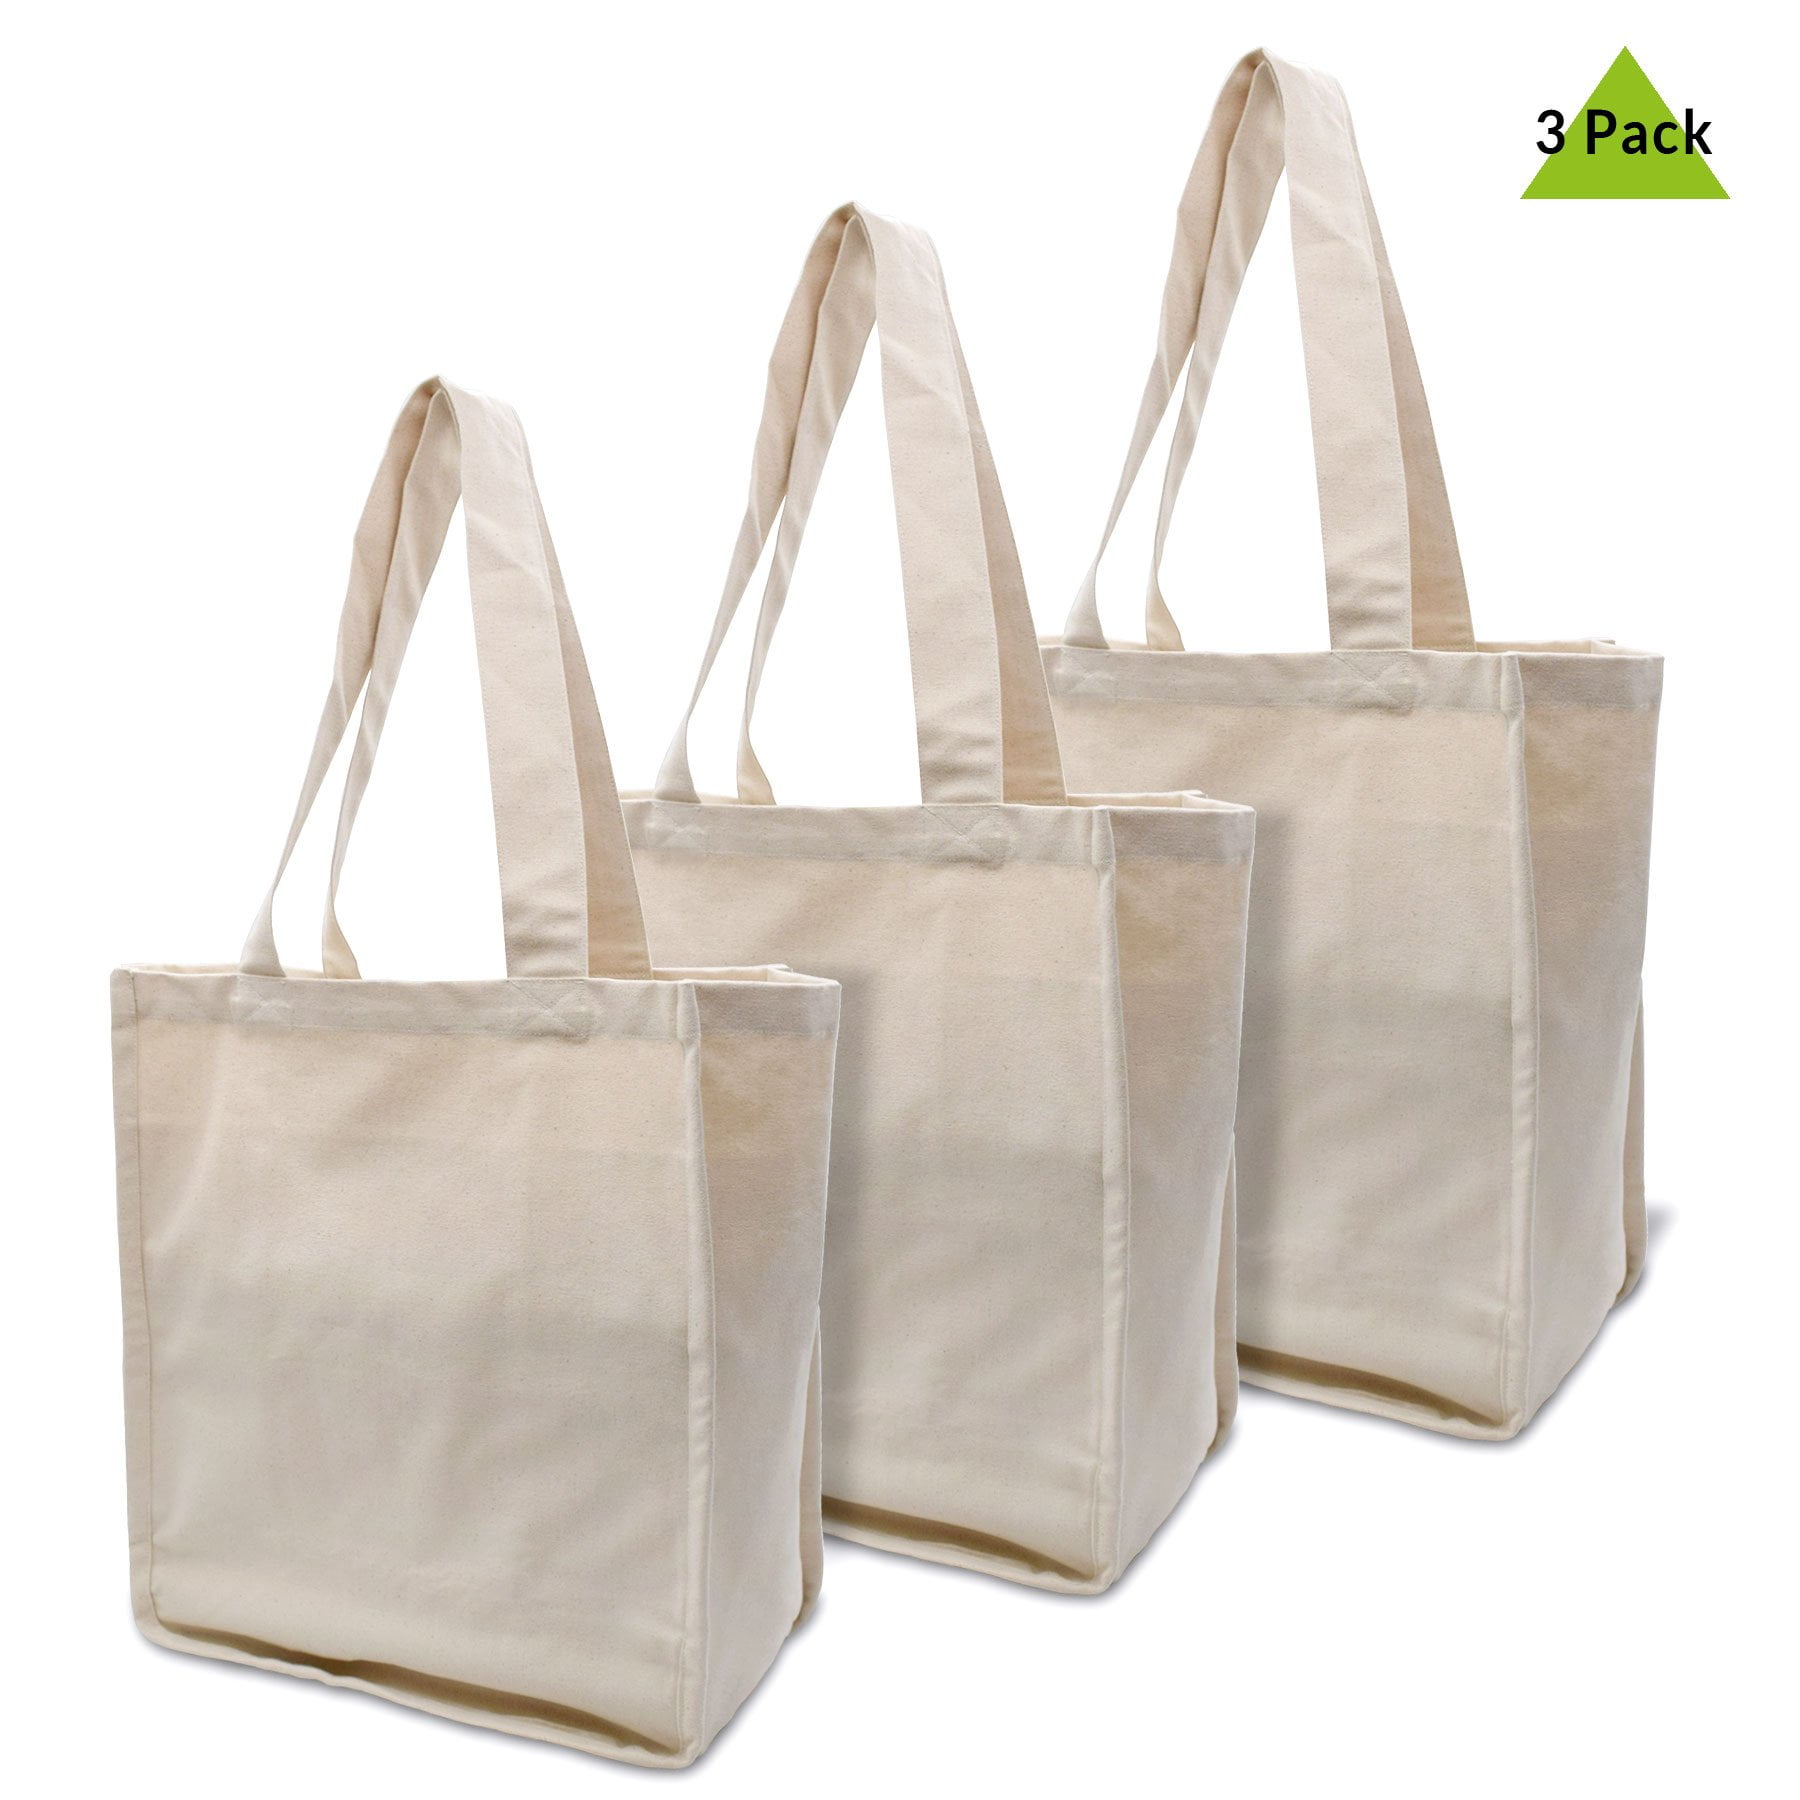 Zenpac- Organic Natural Cotton Canvas Grocery Bags Wine Bottle Sleeves ...